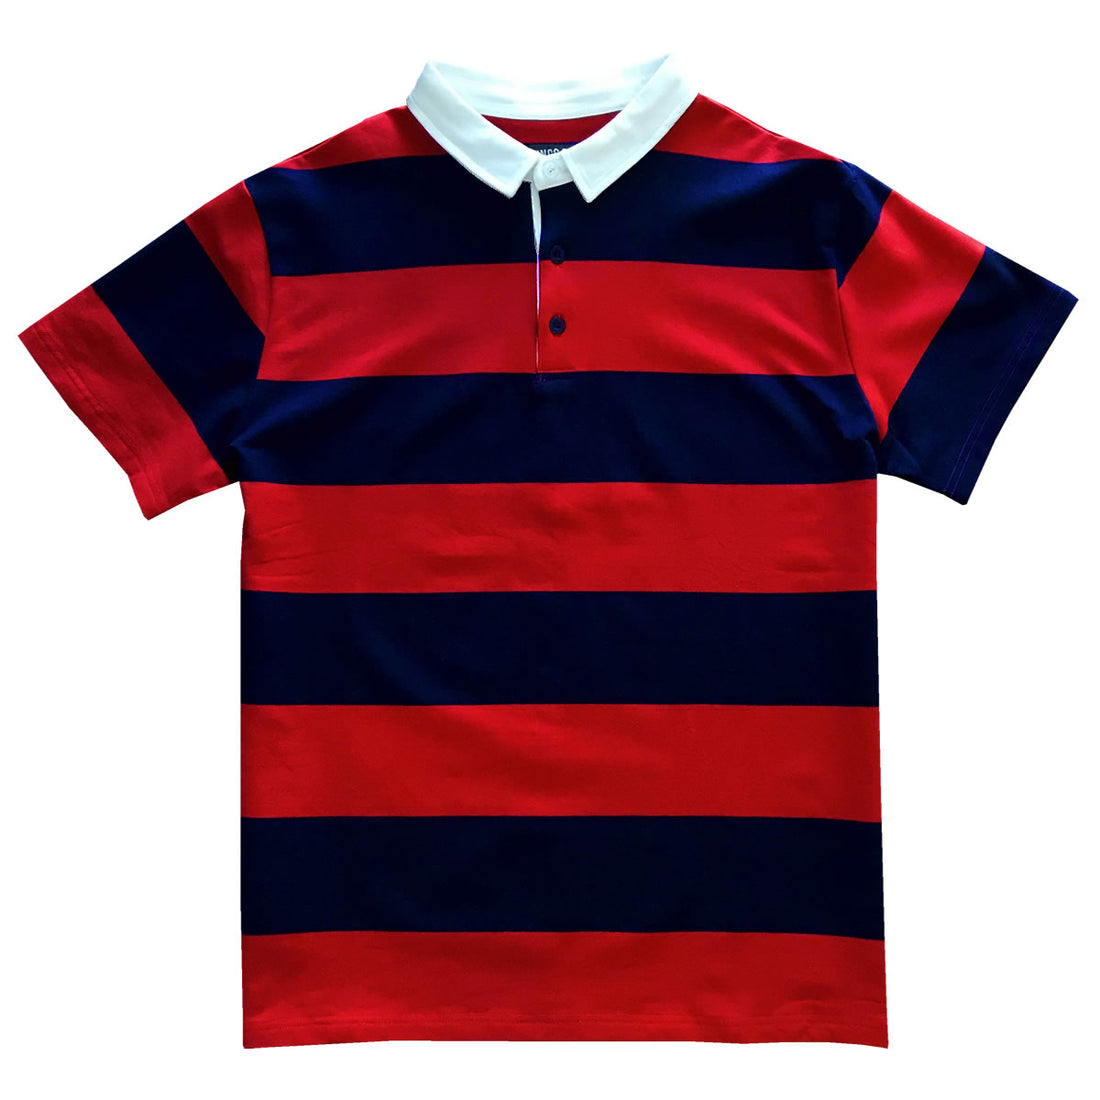 Navy Blue and Red Short Sleeve Striped Men's Rugby Shirt